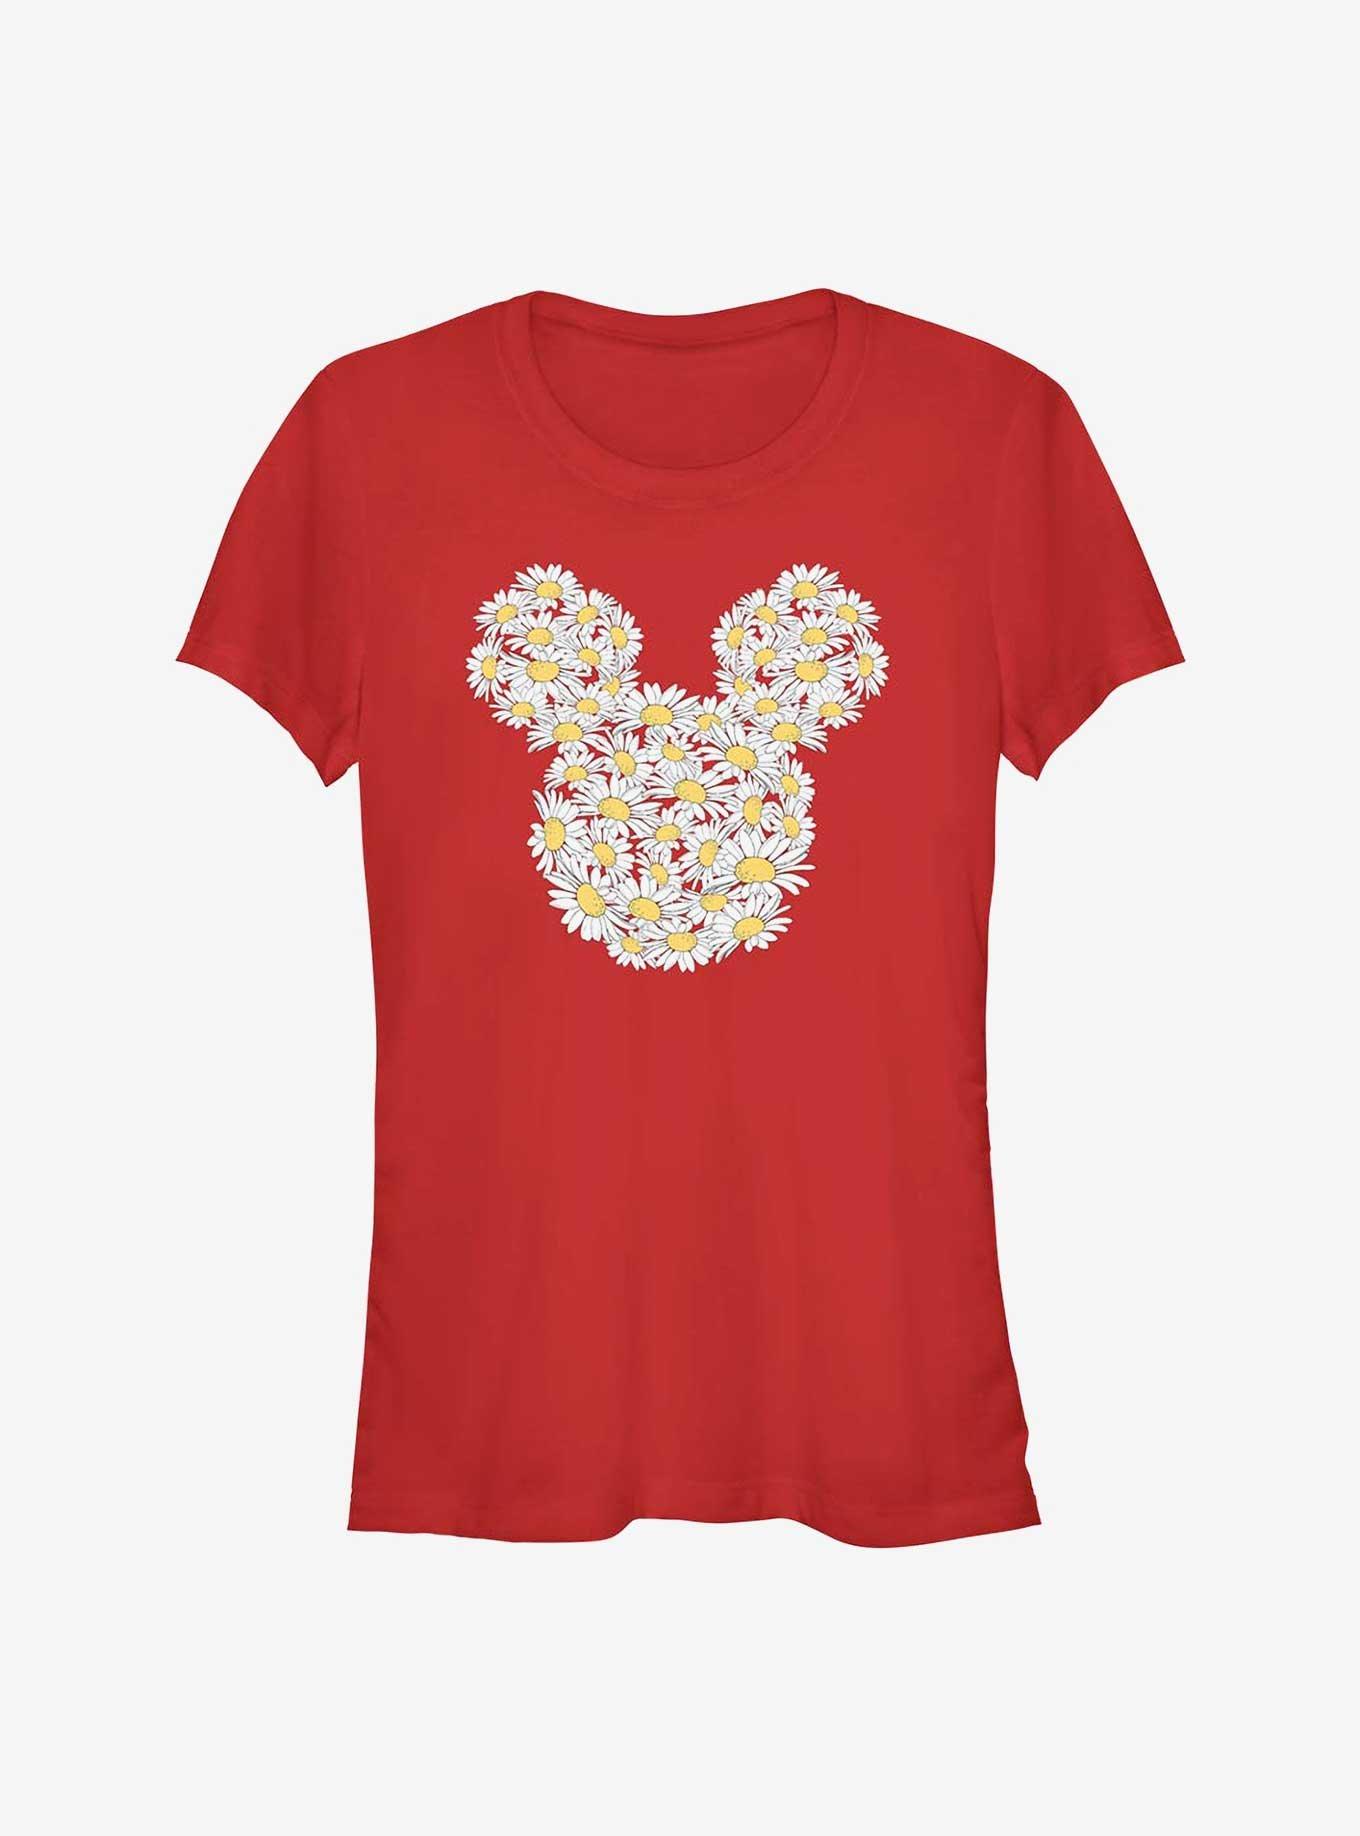 Disney Mickey Mouse Daisy Flower Fill Girls T-Shirt, RED, hi-res